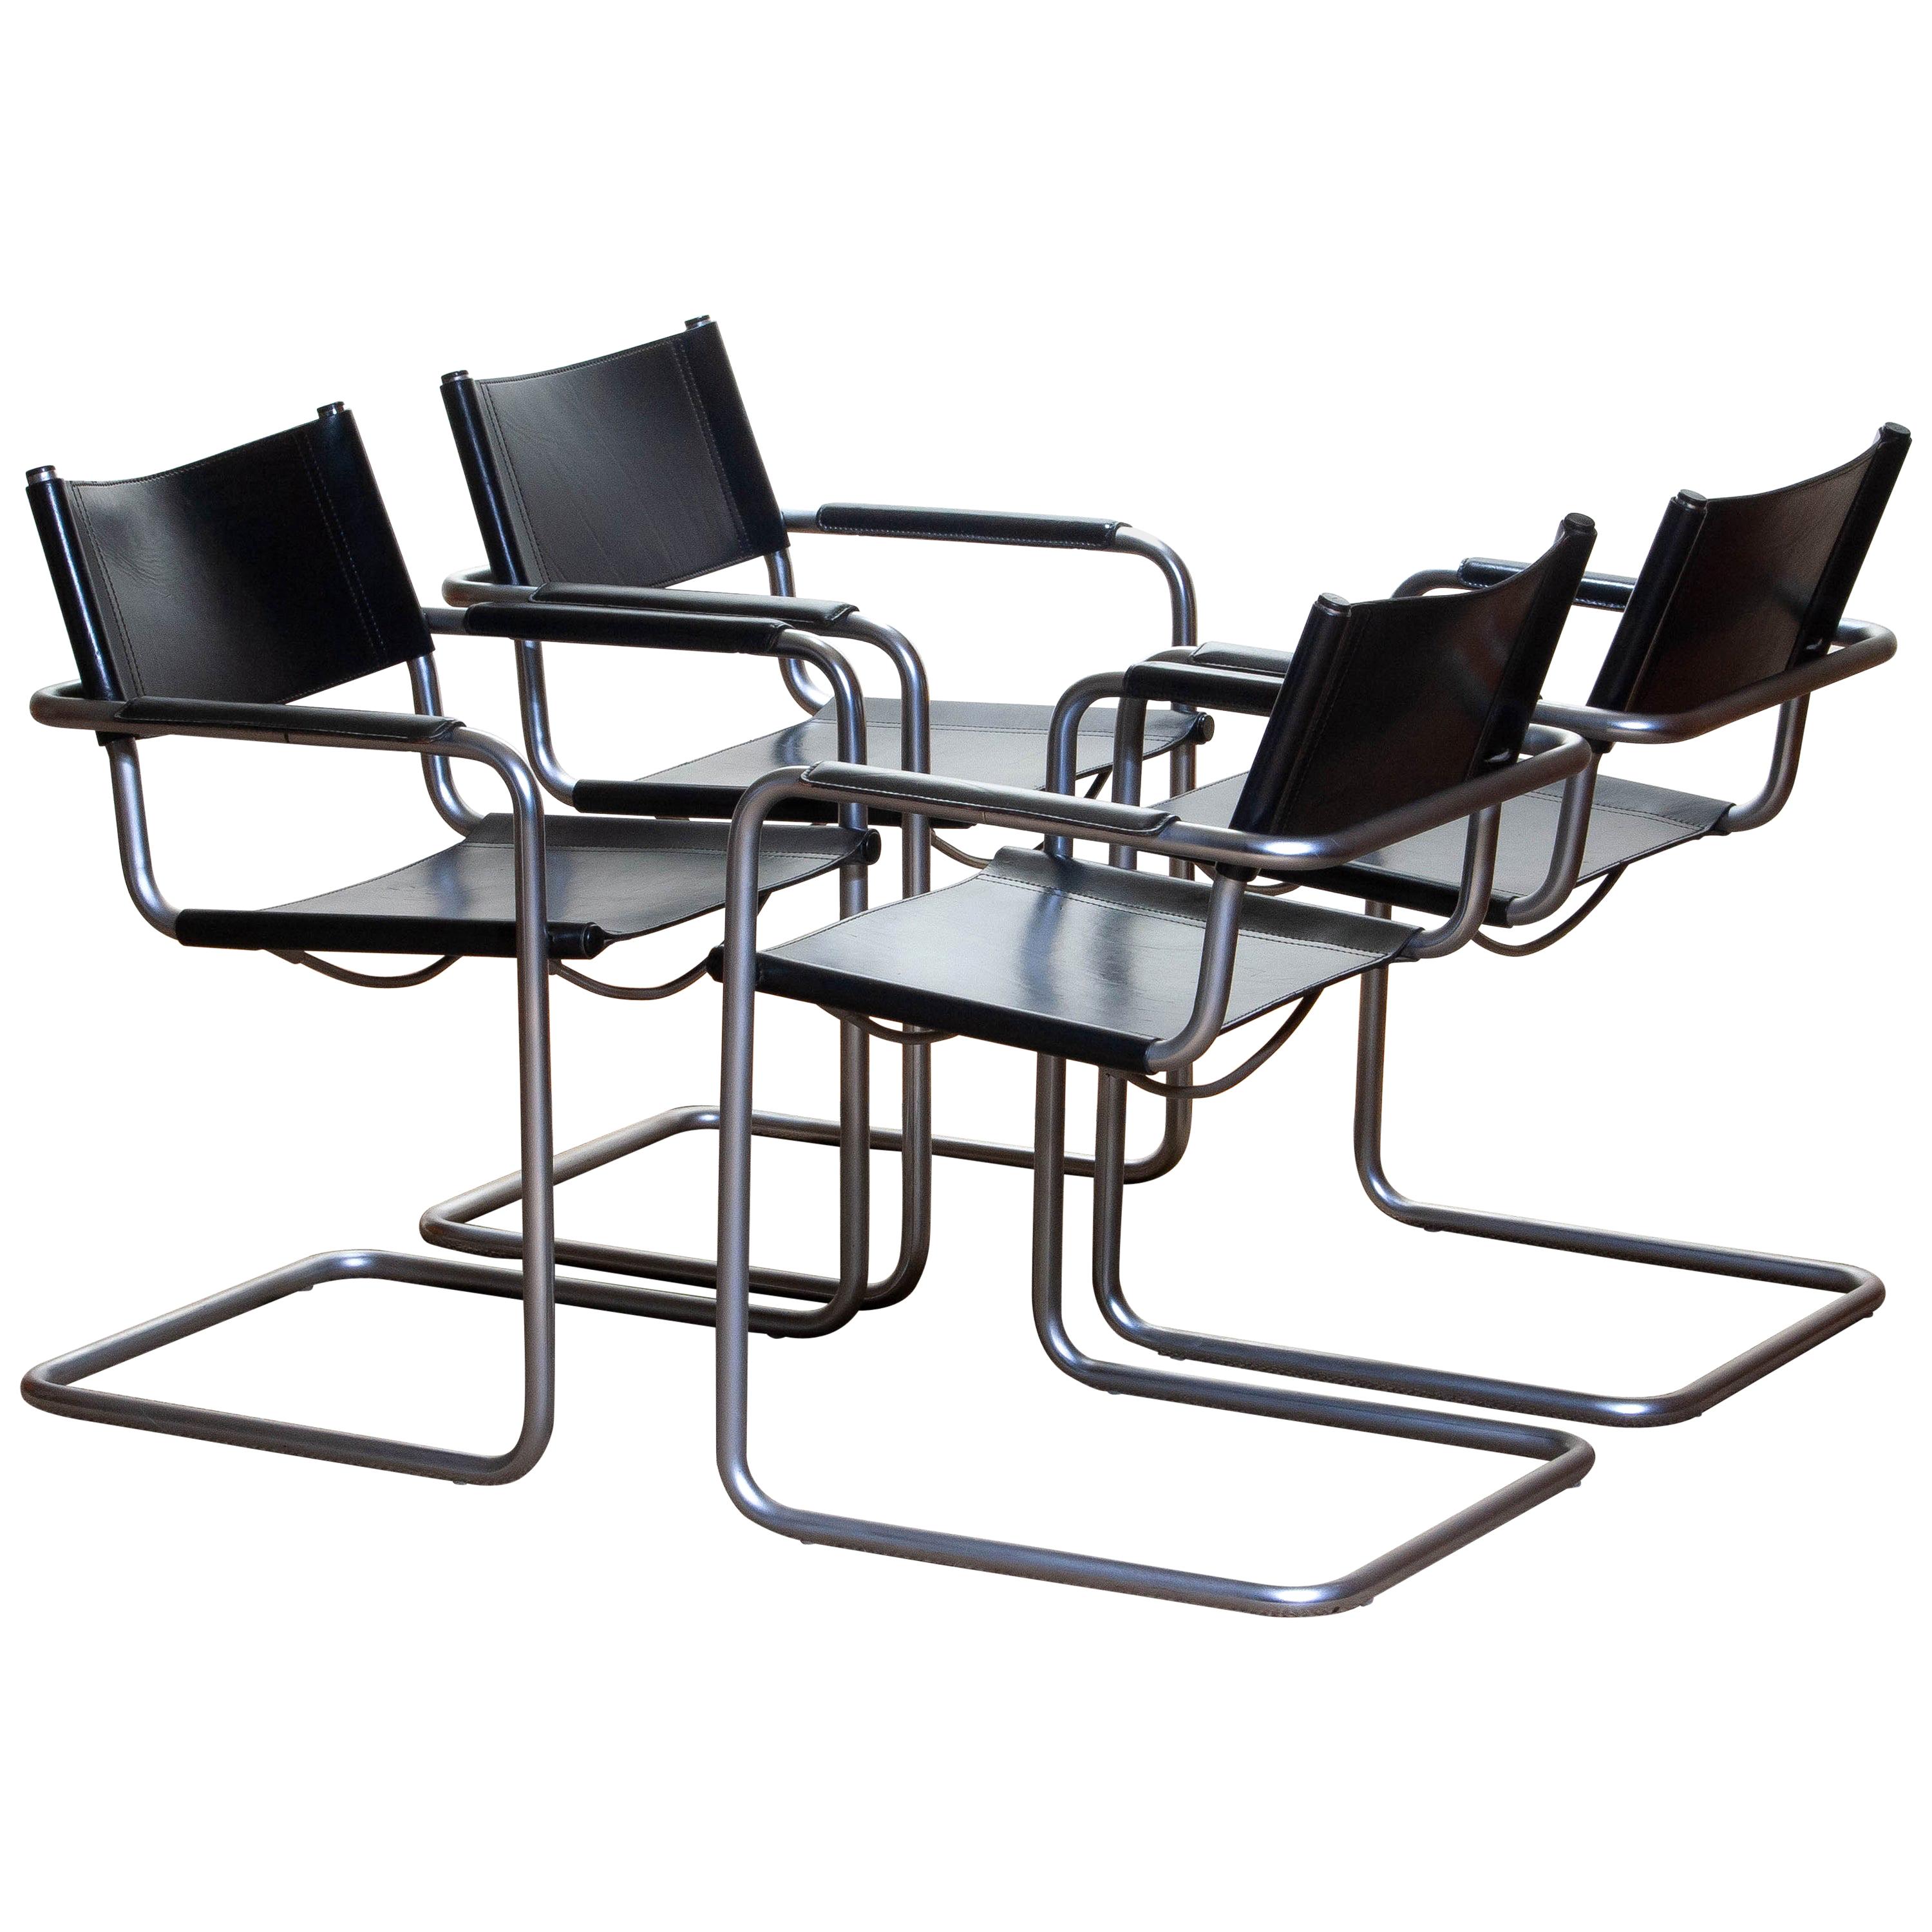 1970, perfect set of four dining / office chairs made by Matteo Grassi, Italy.
The chairs have tubular titanium look steel frames with sturdy black leather seating and backrest.
They are signed on the back of the backrest.
Overall condition is